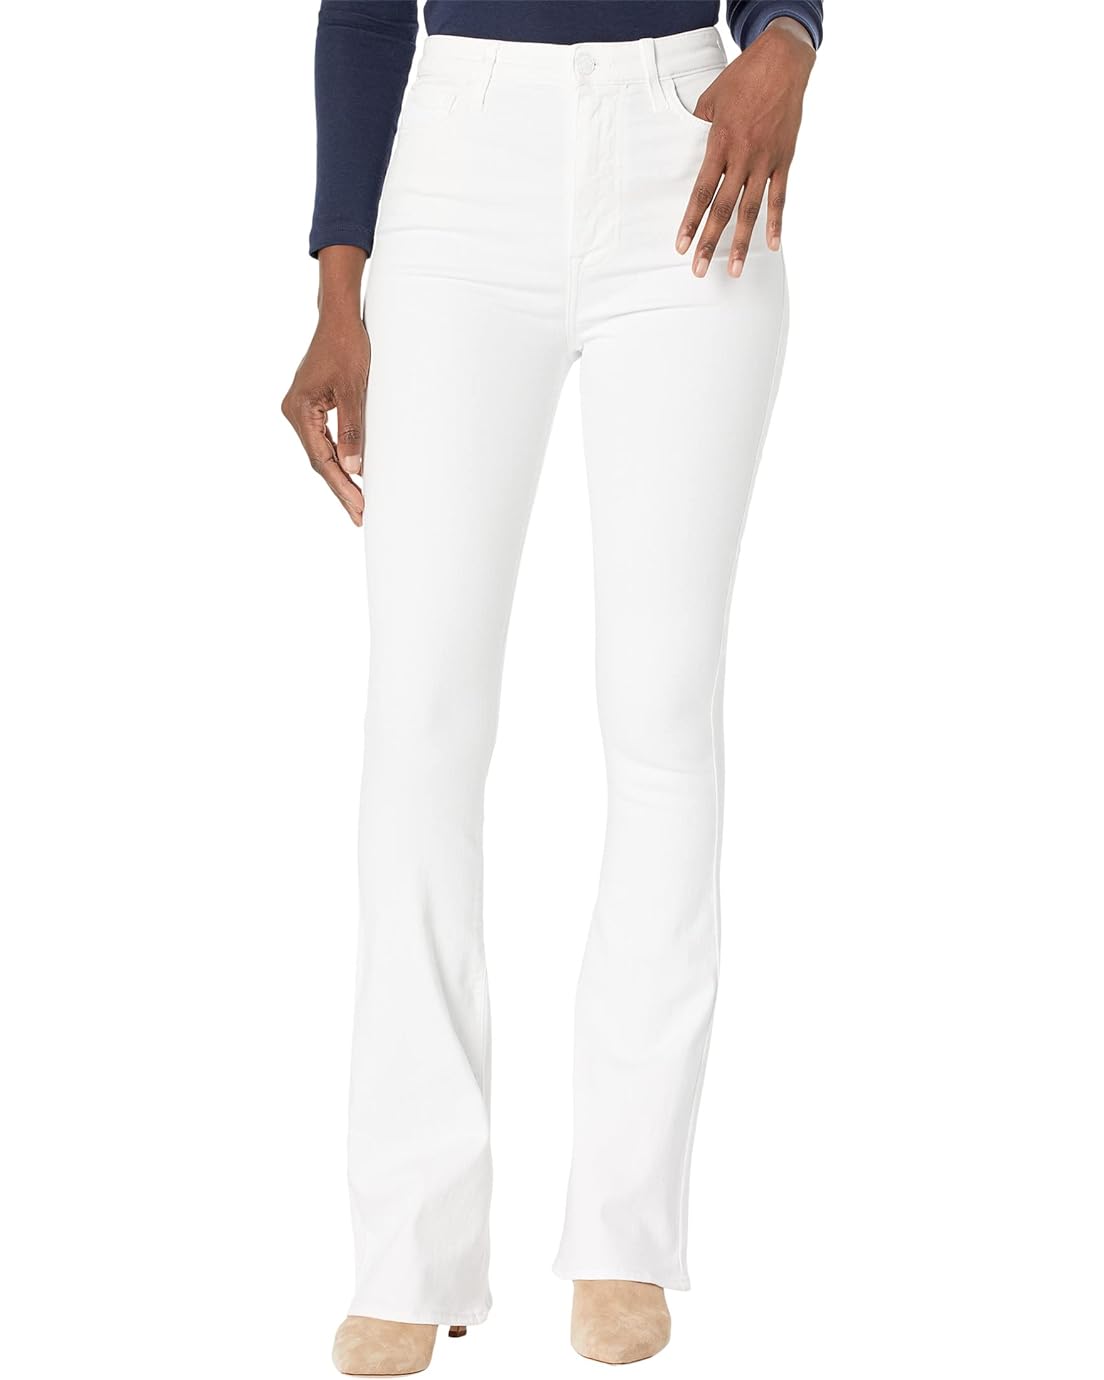  7 For All Mankind Ultra High-Rise Skinny Boot in No Filter Clean White